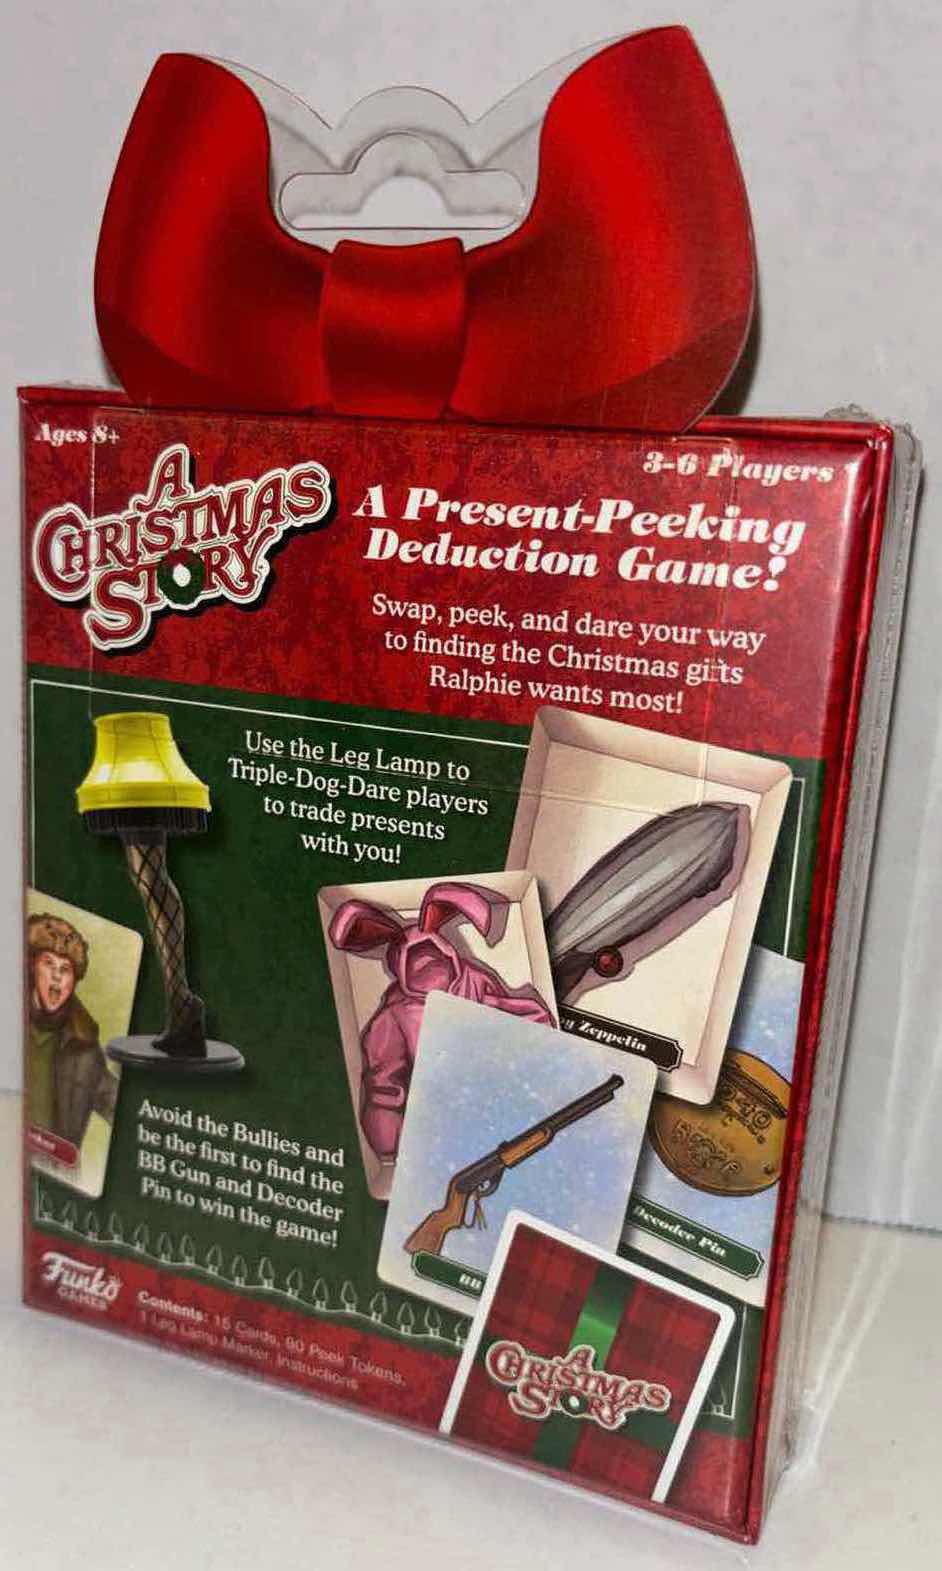 Photo 4 of NEW FUNKO GAMES A CHRISTMAS STORY “A MAJOR CARD GAME” & NECA A CHRISTMAS STORY LEG LAMP TALKING KEYCHAIN (2)